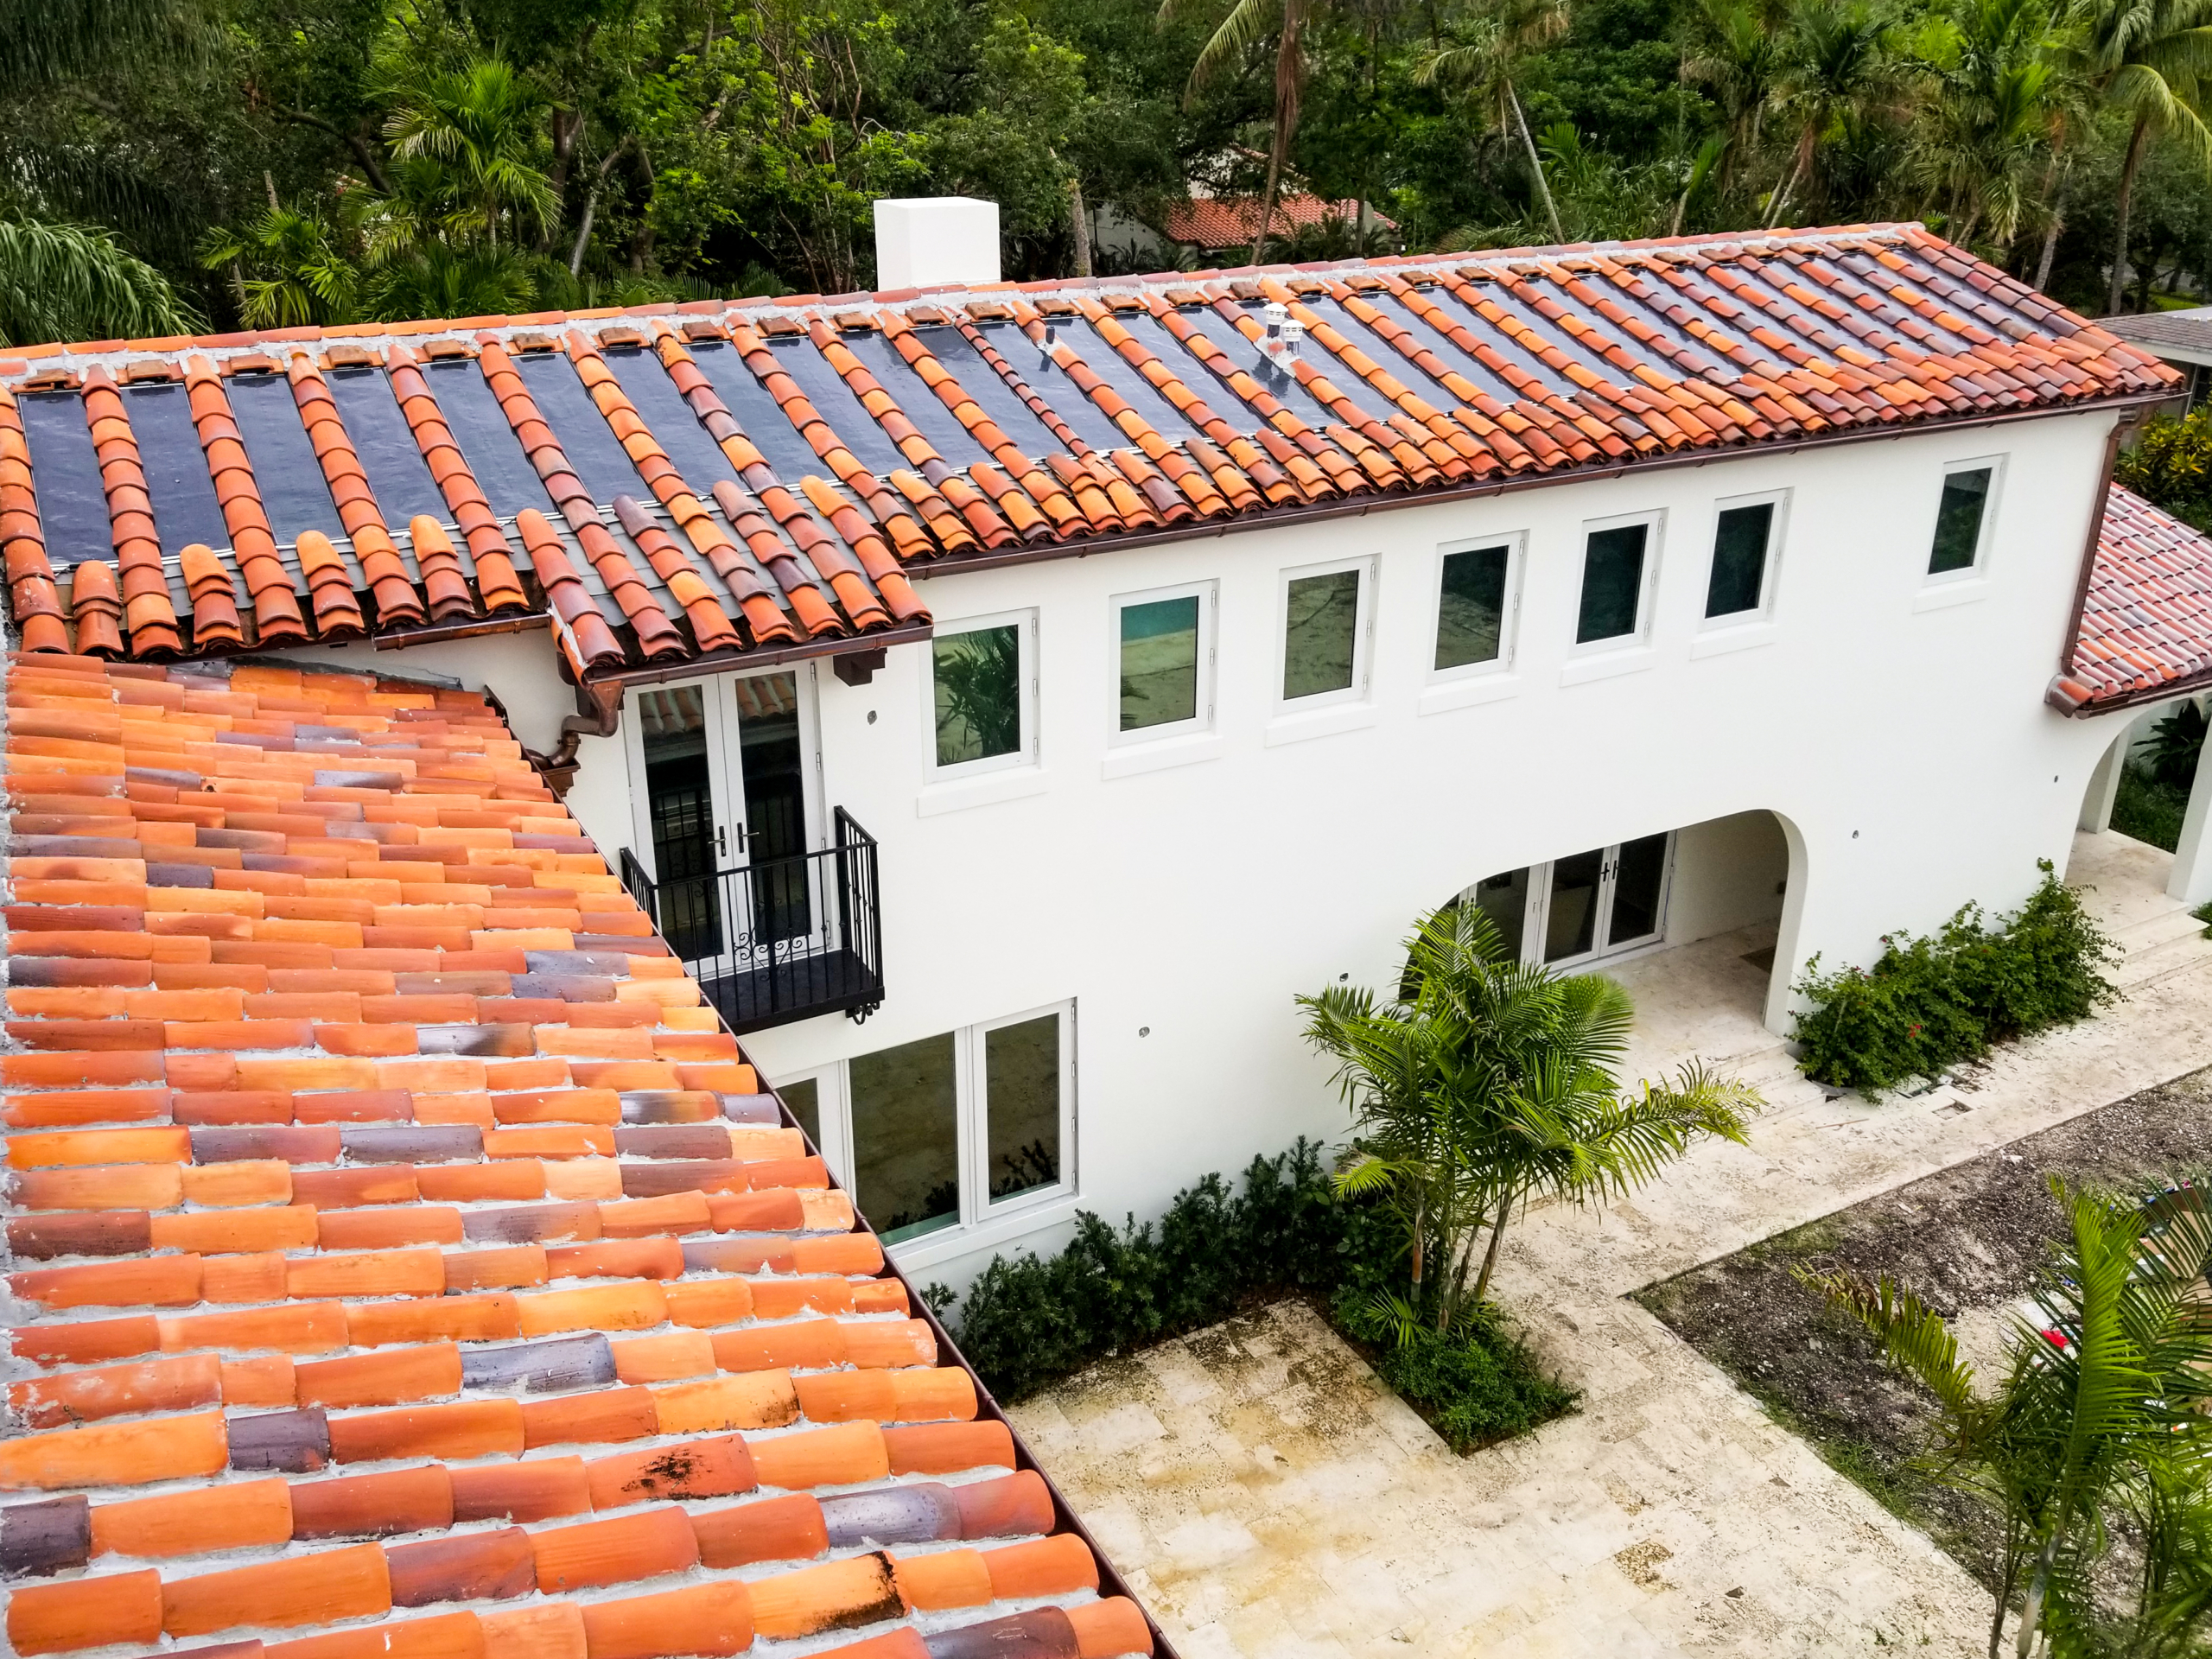 An aerial view of a house with orange tile roof.